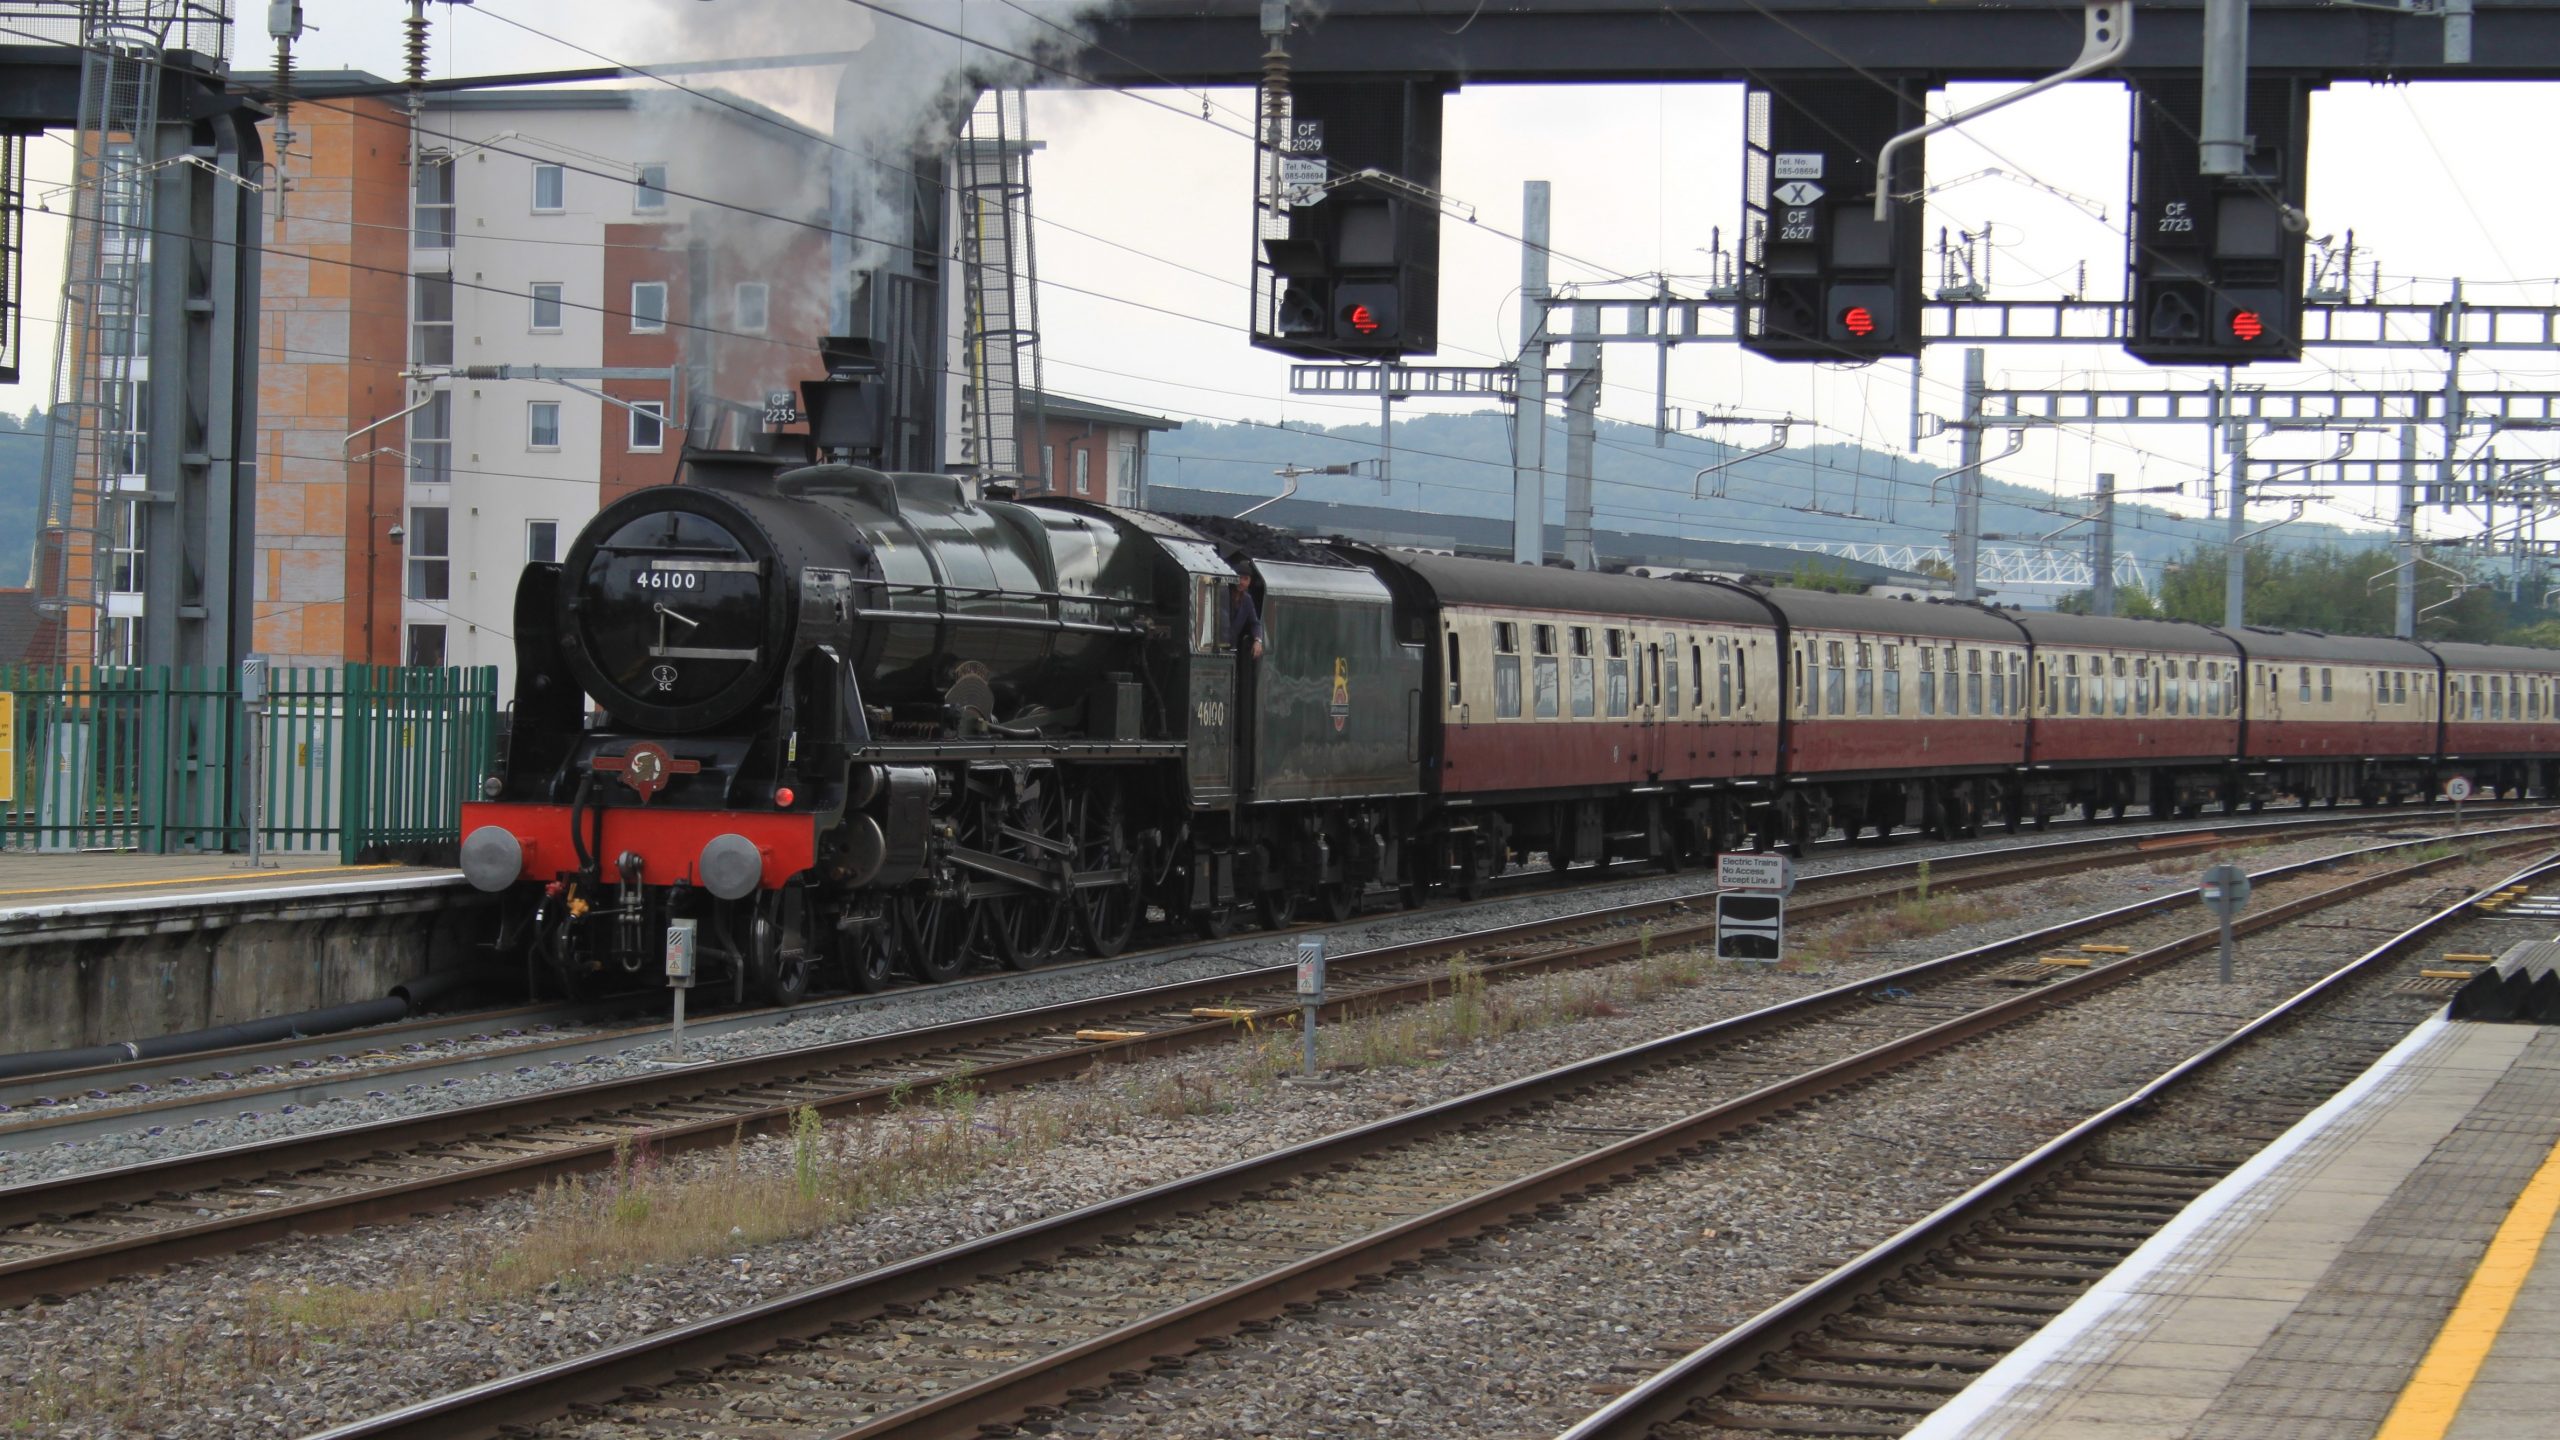 46100 Royal Scot pulling into Cardiff Central to form the return 15:25 Cardiff Central - Kingswear Special - 
Image Credit : Peter Young